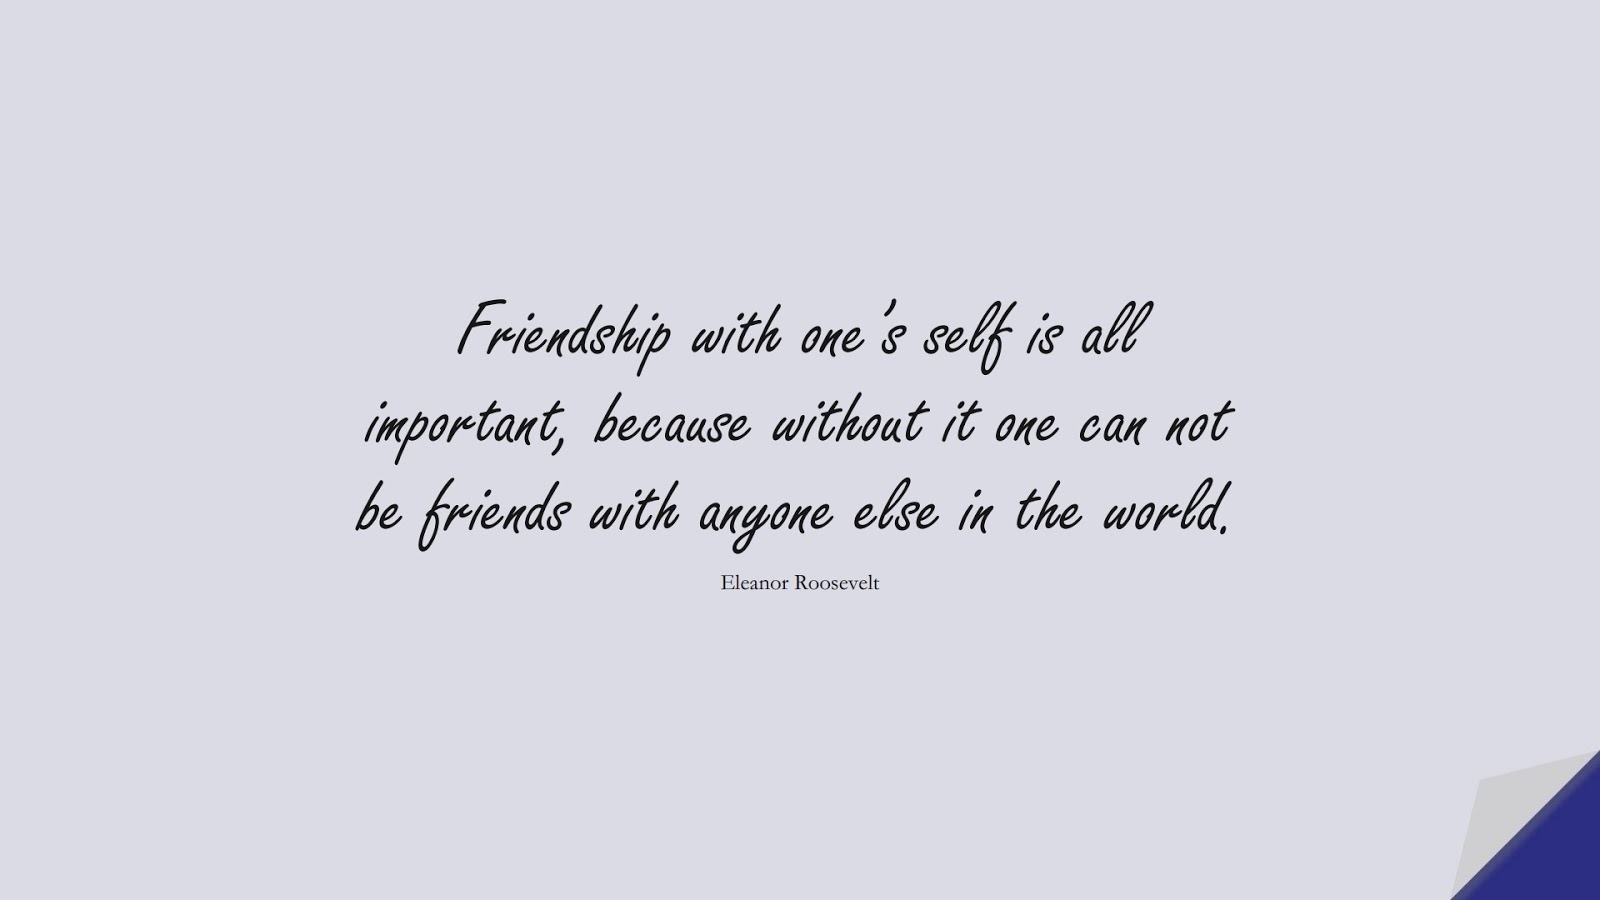 Friendship with one’s self is all important, because without it one can not be friends with anyone else in the world. (Eleanor Roosevelt);  #LoveQuotes